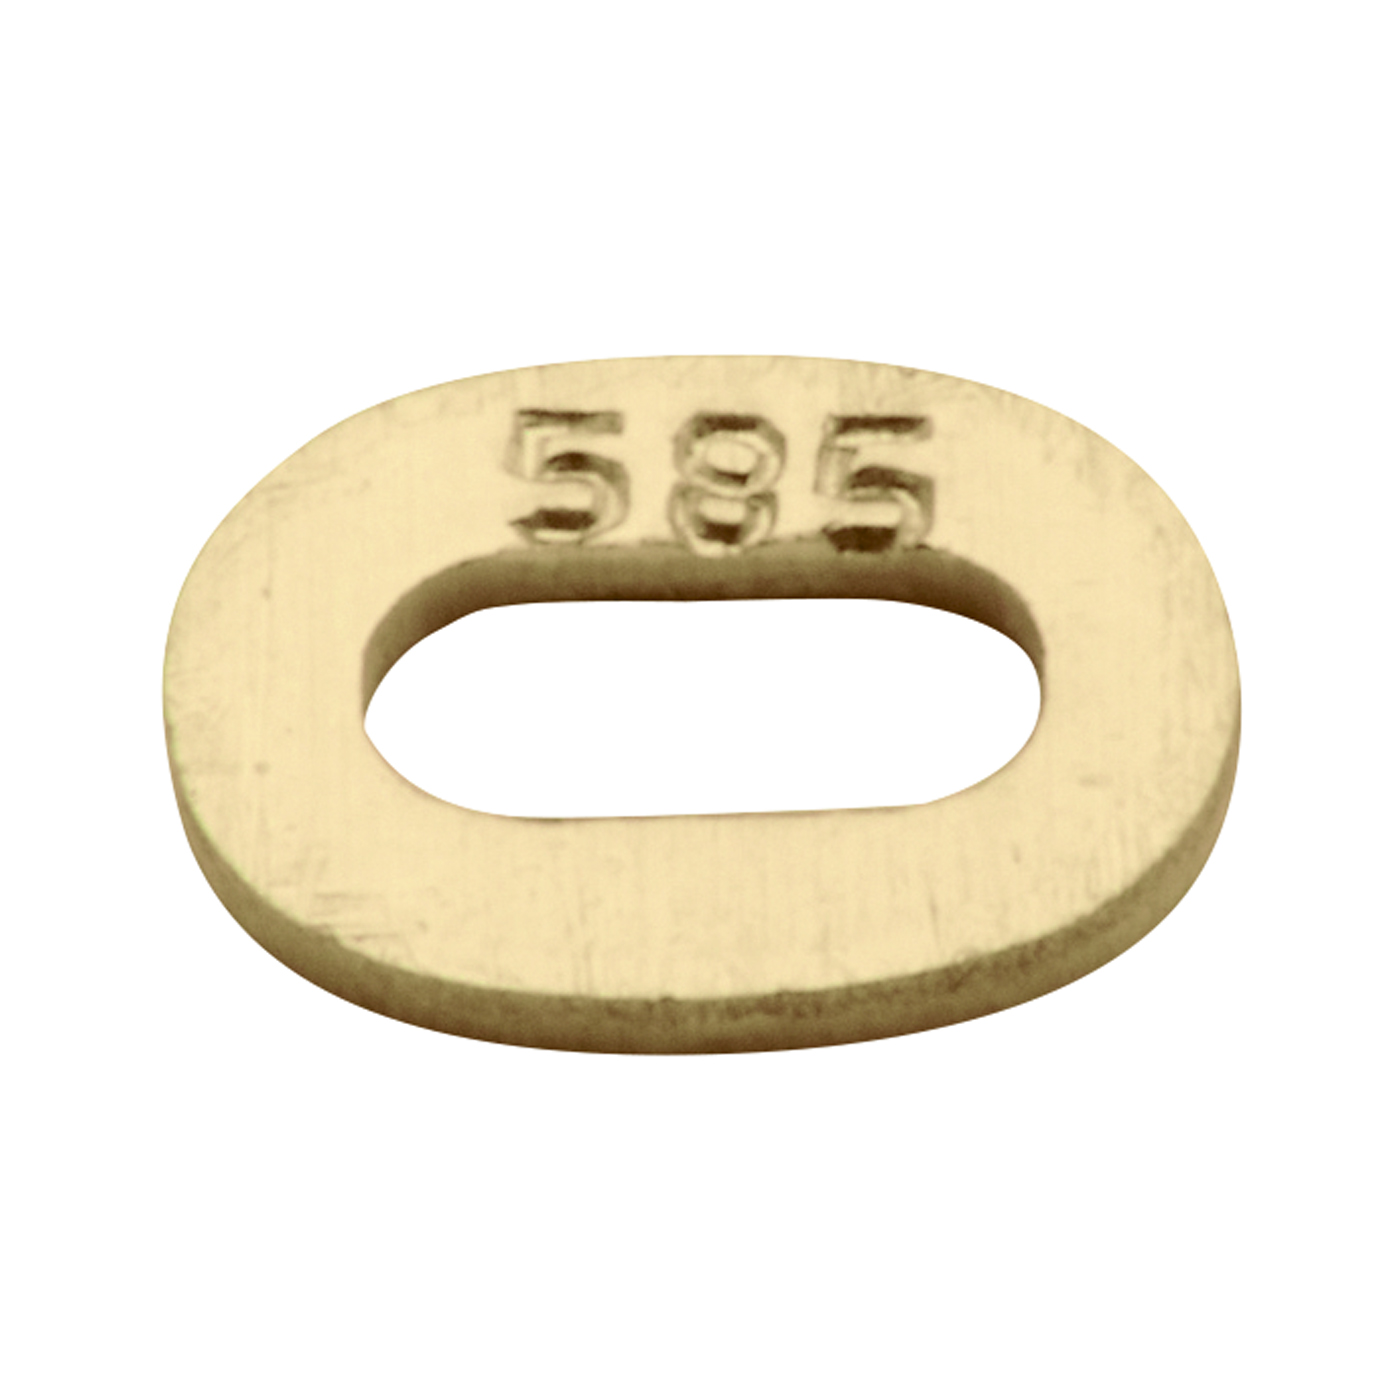 Chain Tag, Oval, 585G, 4.9 x 3.6 mm - 10 pieces